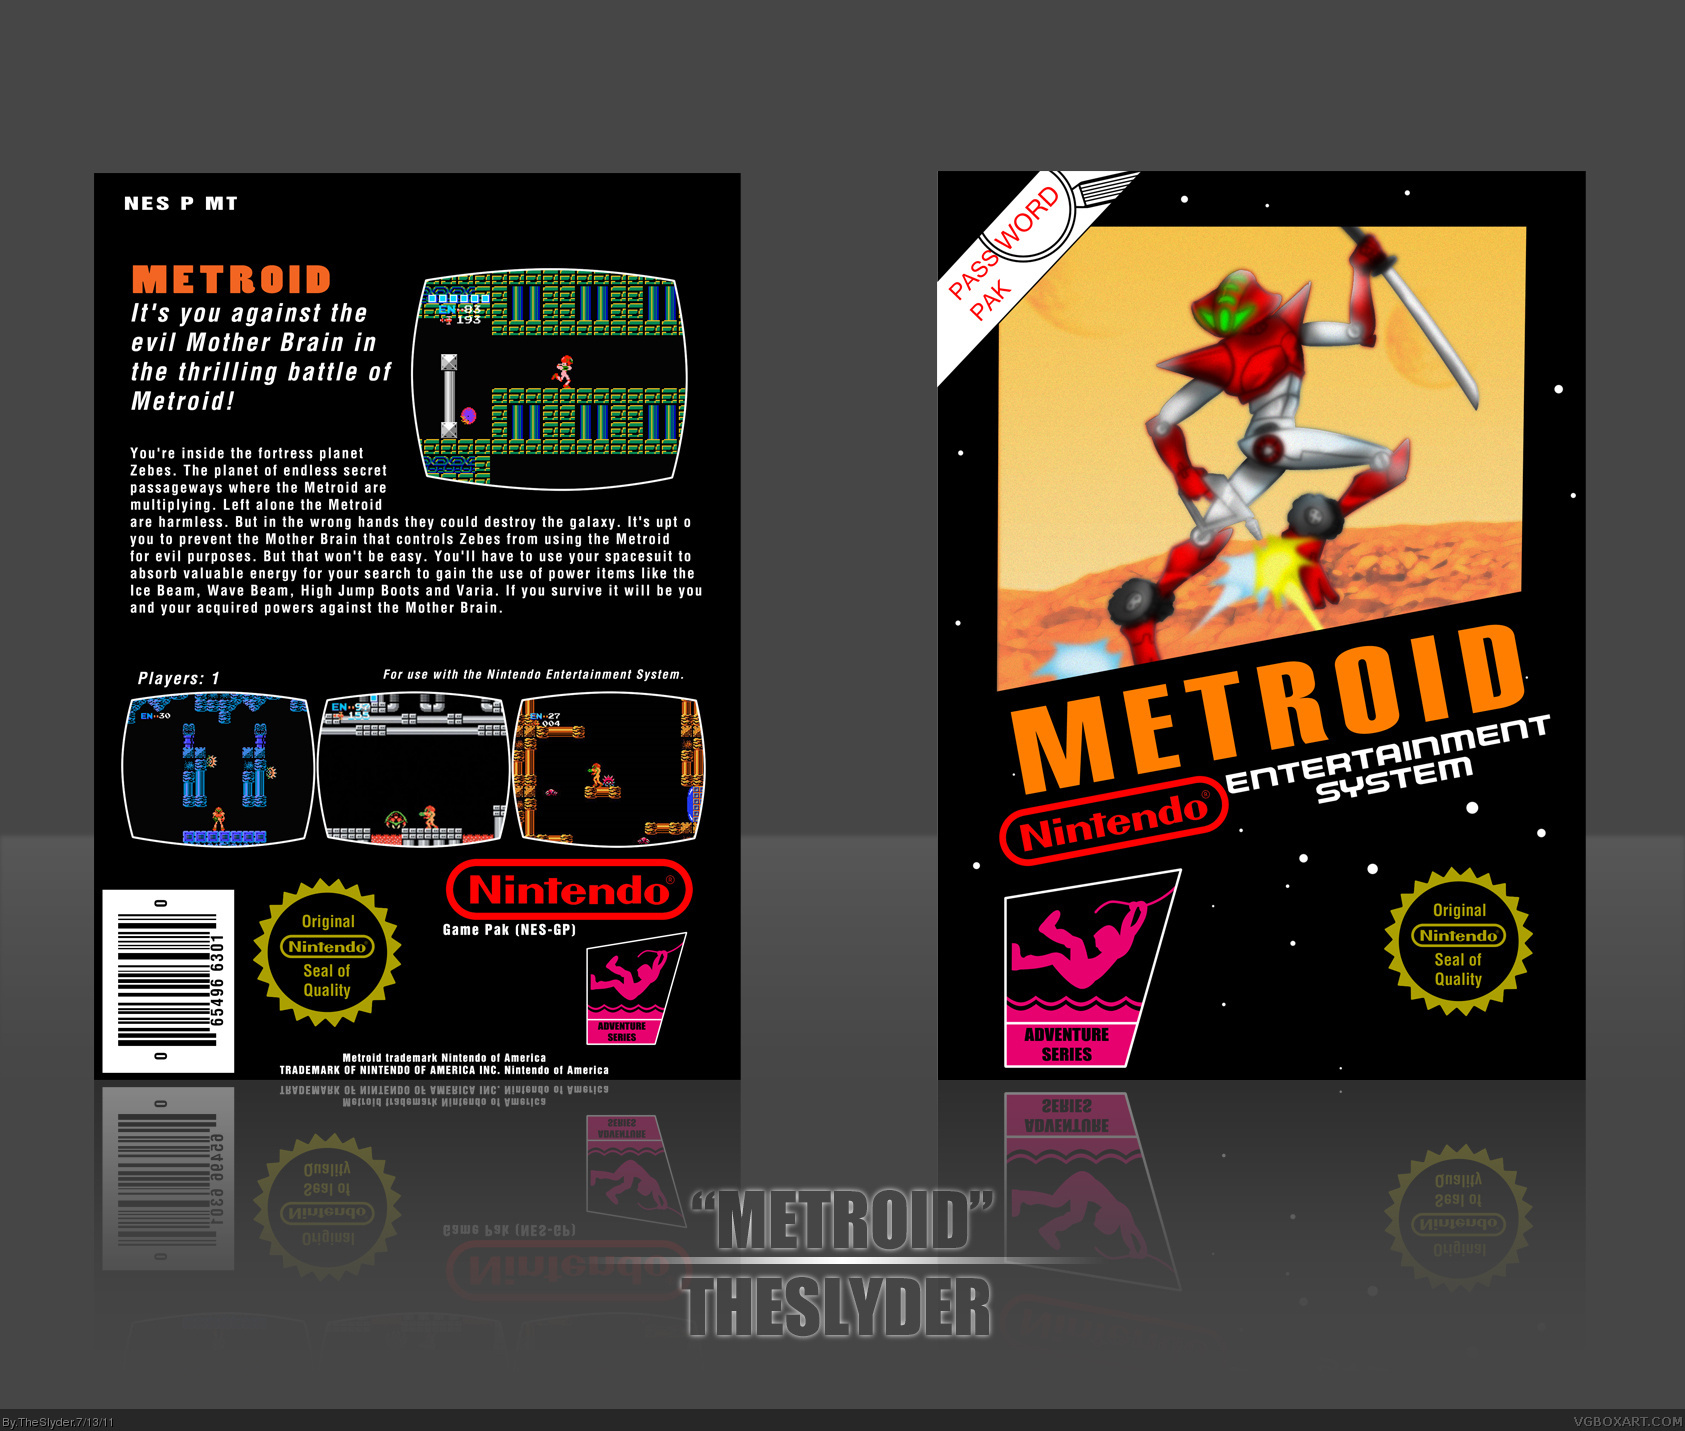 Viewing full size Metroid box cover.